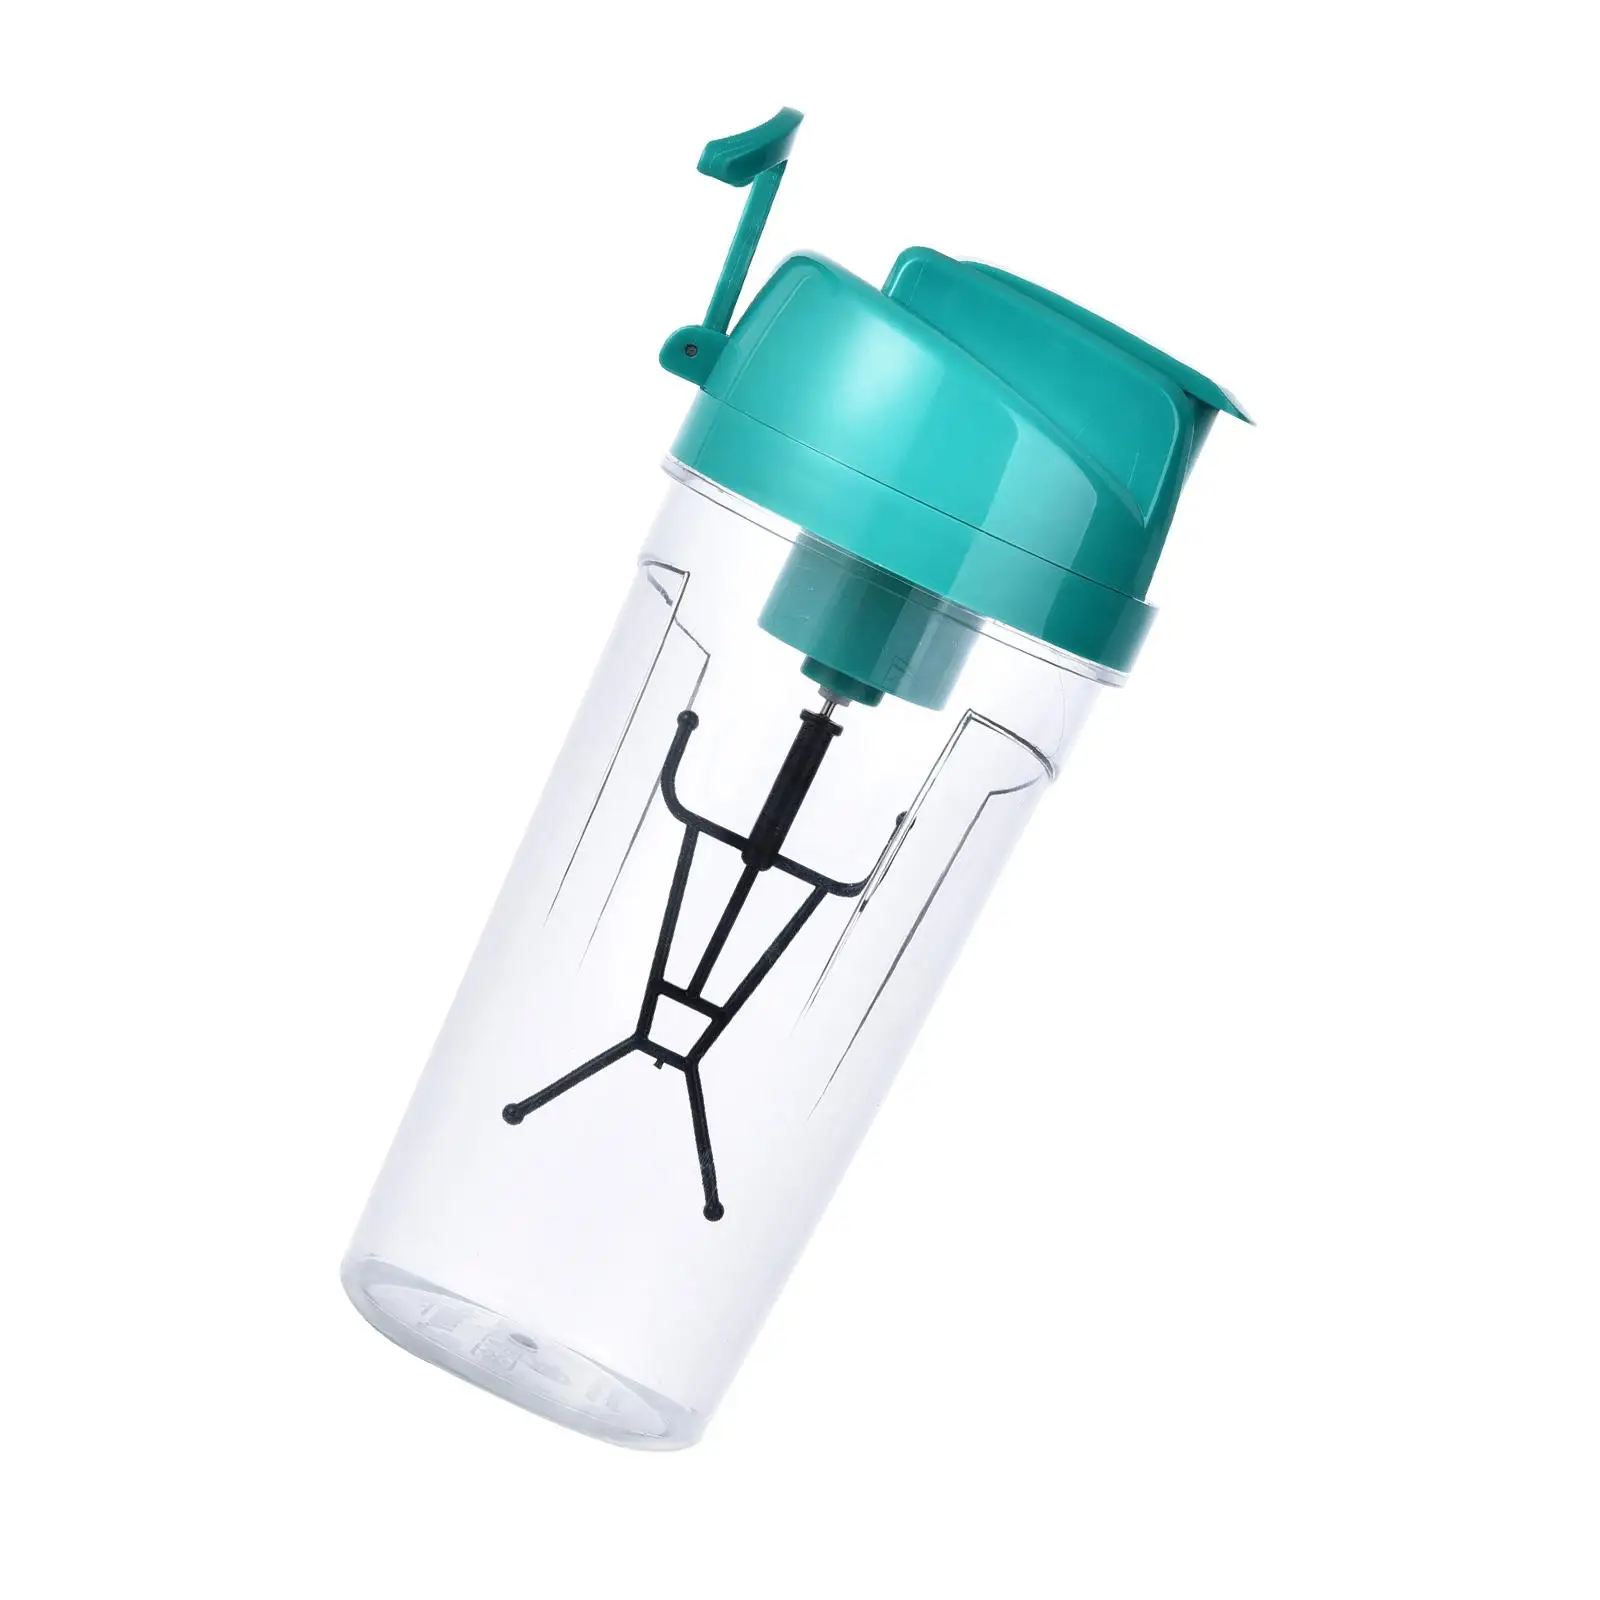 Portable Electric Protein Shaker Bottle Self Stirring Rechargeable Cocktail Coffee Drinking Blender Mixing Cup Mug Mixer Bottles